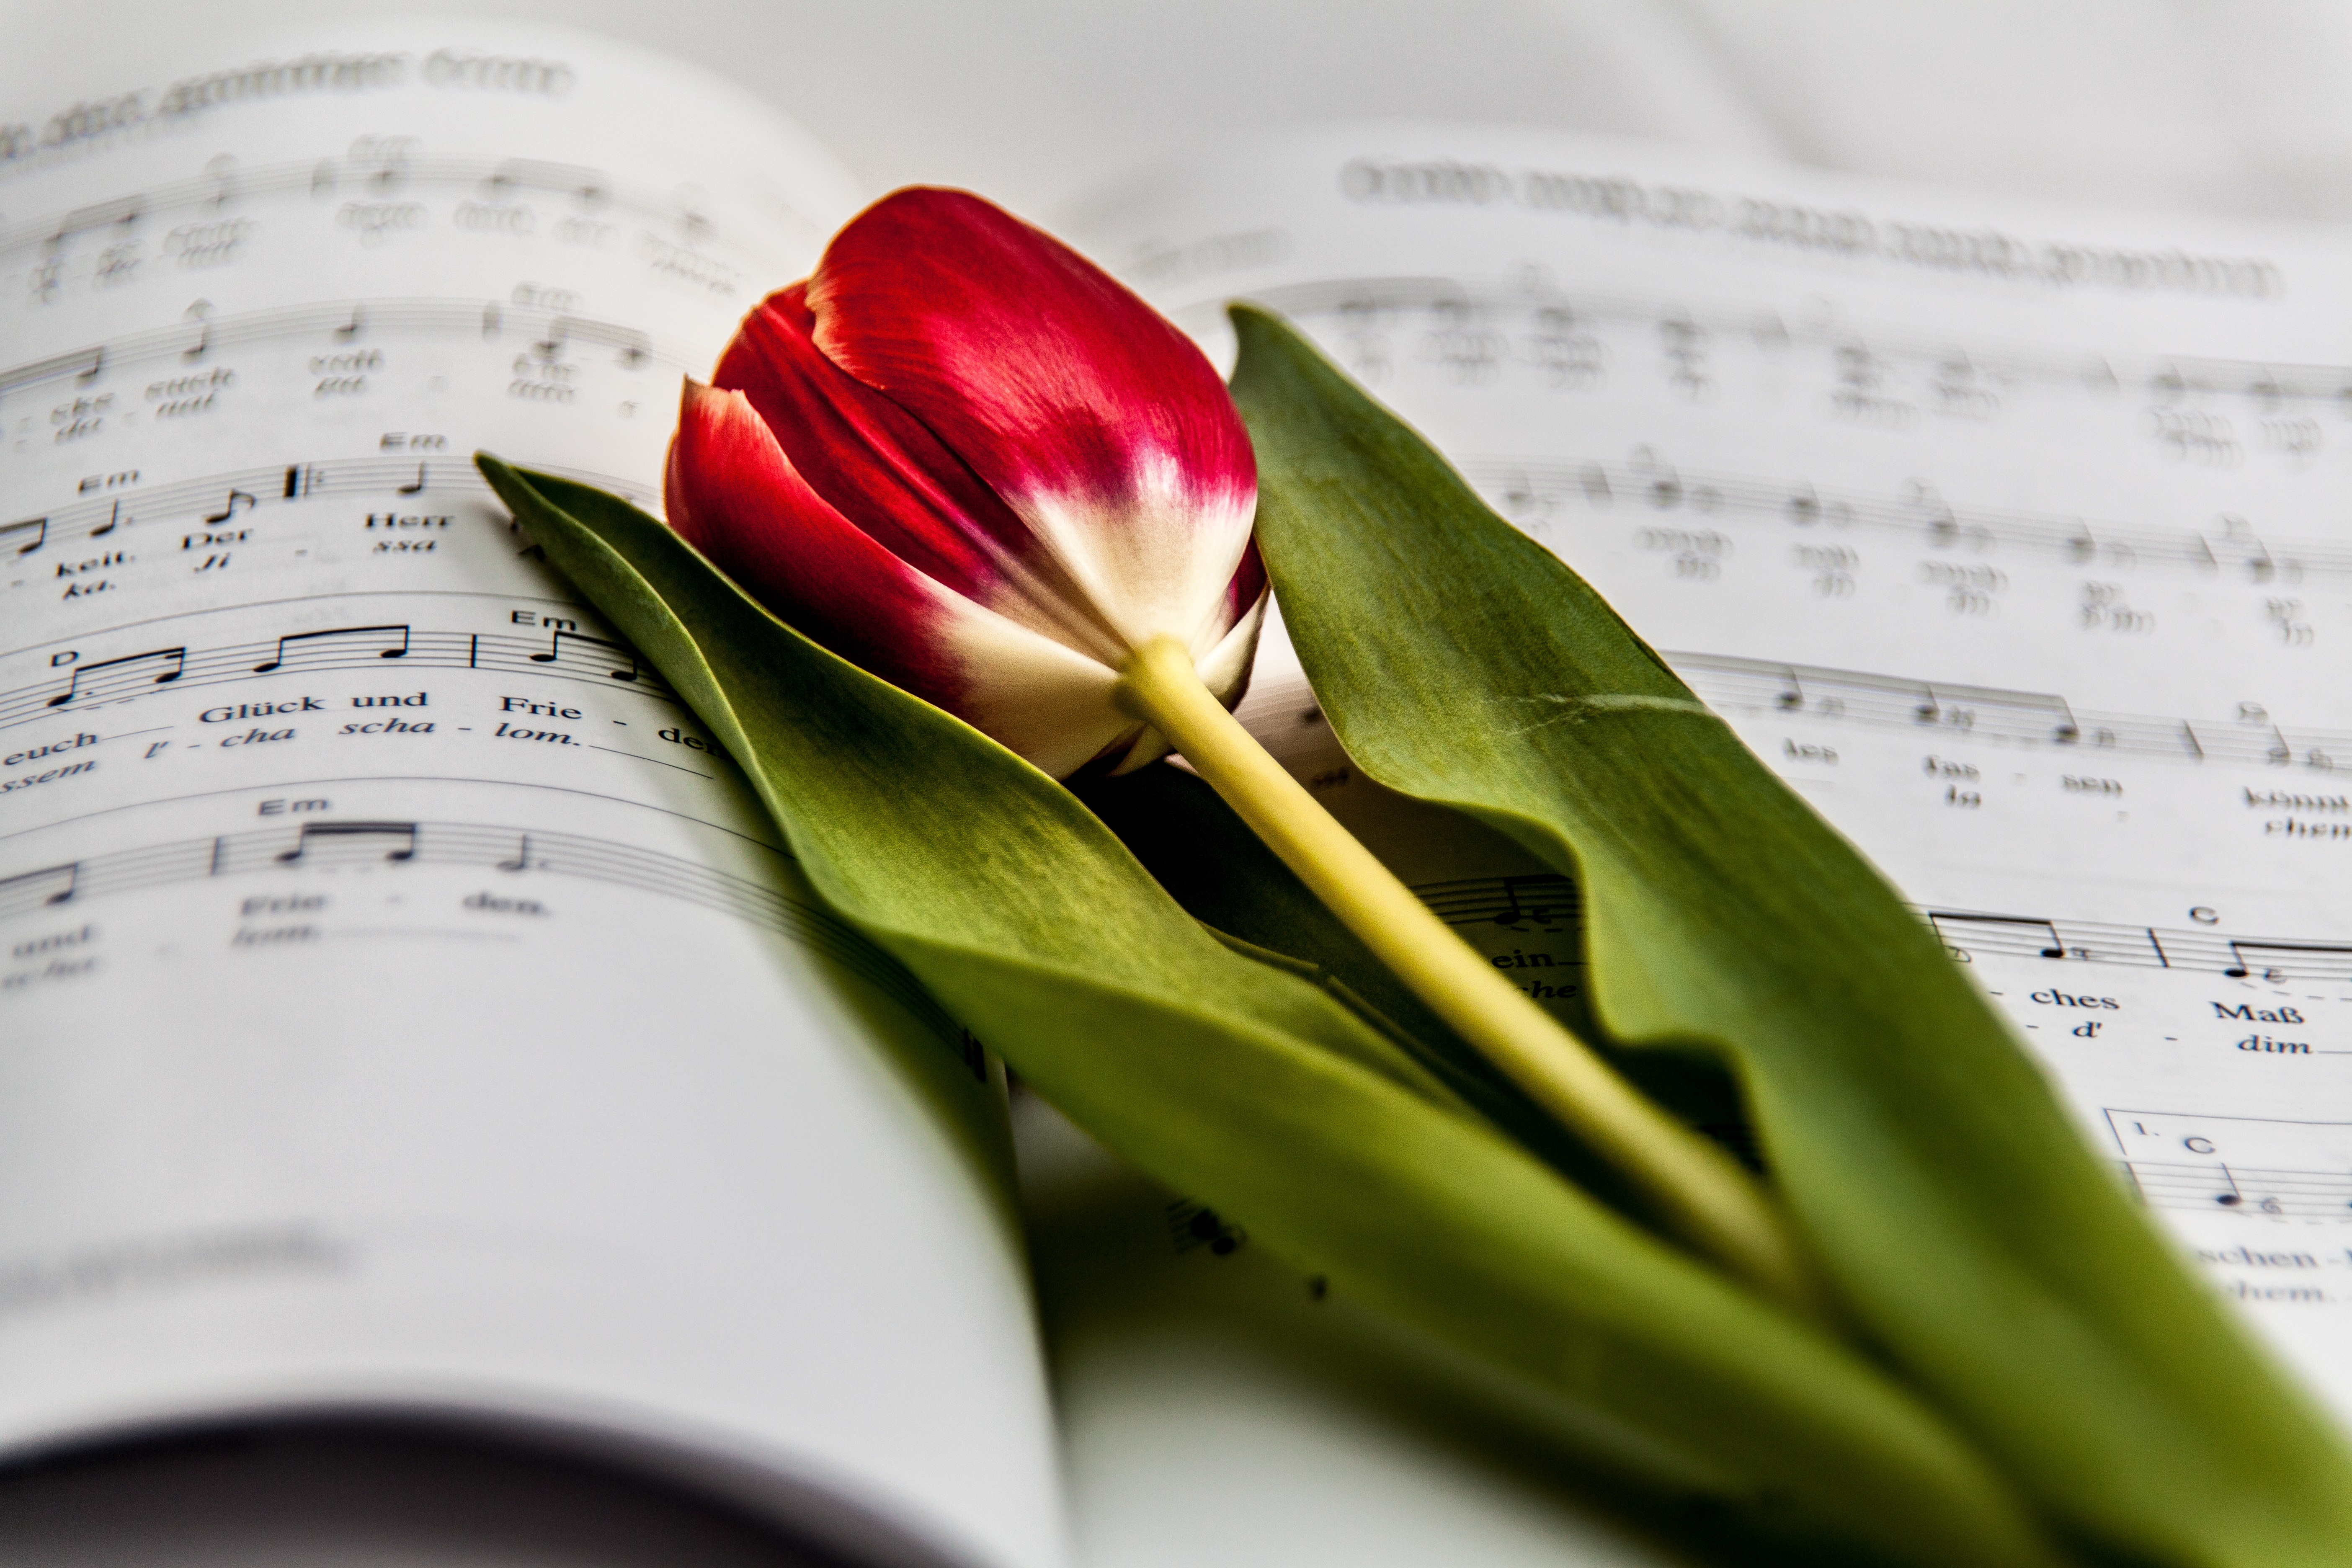 Free photo A red tulip rests on a book of musical notes